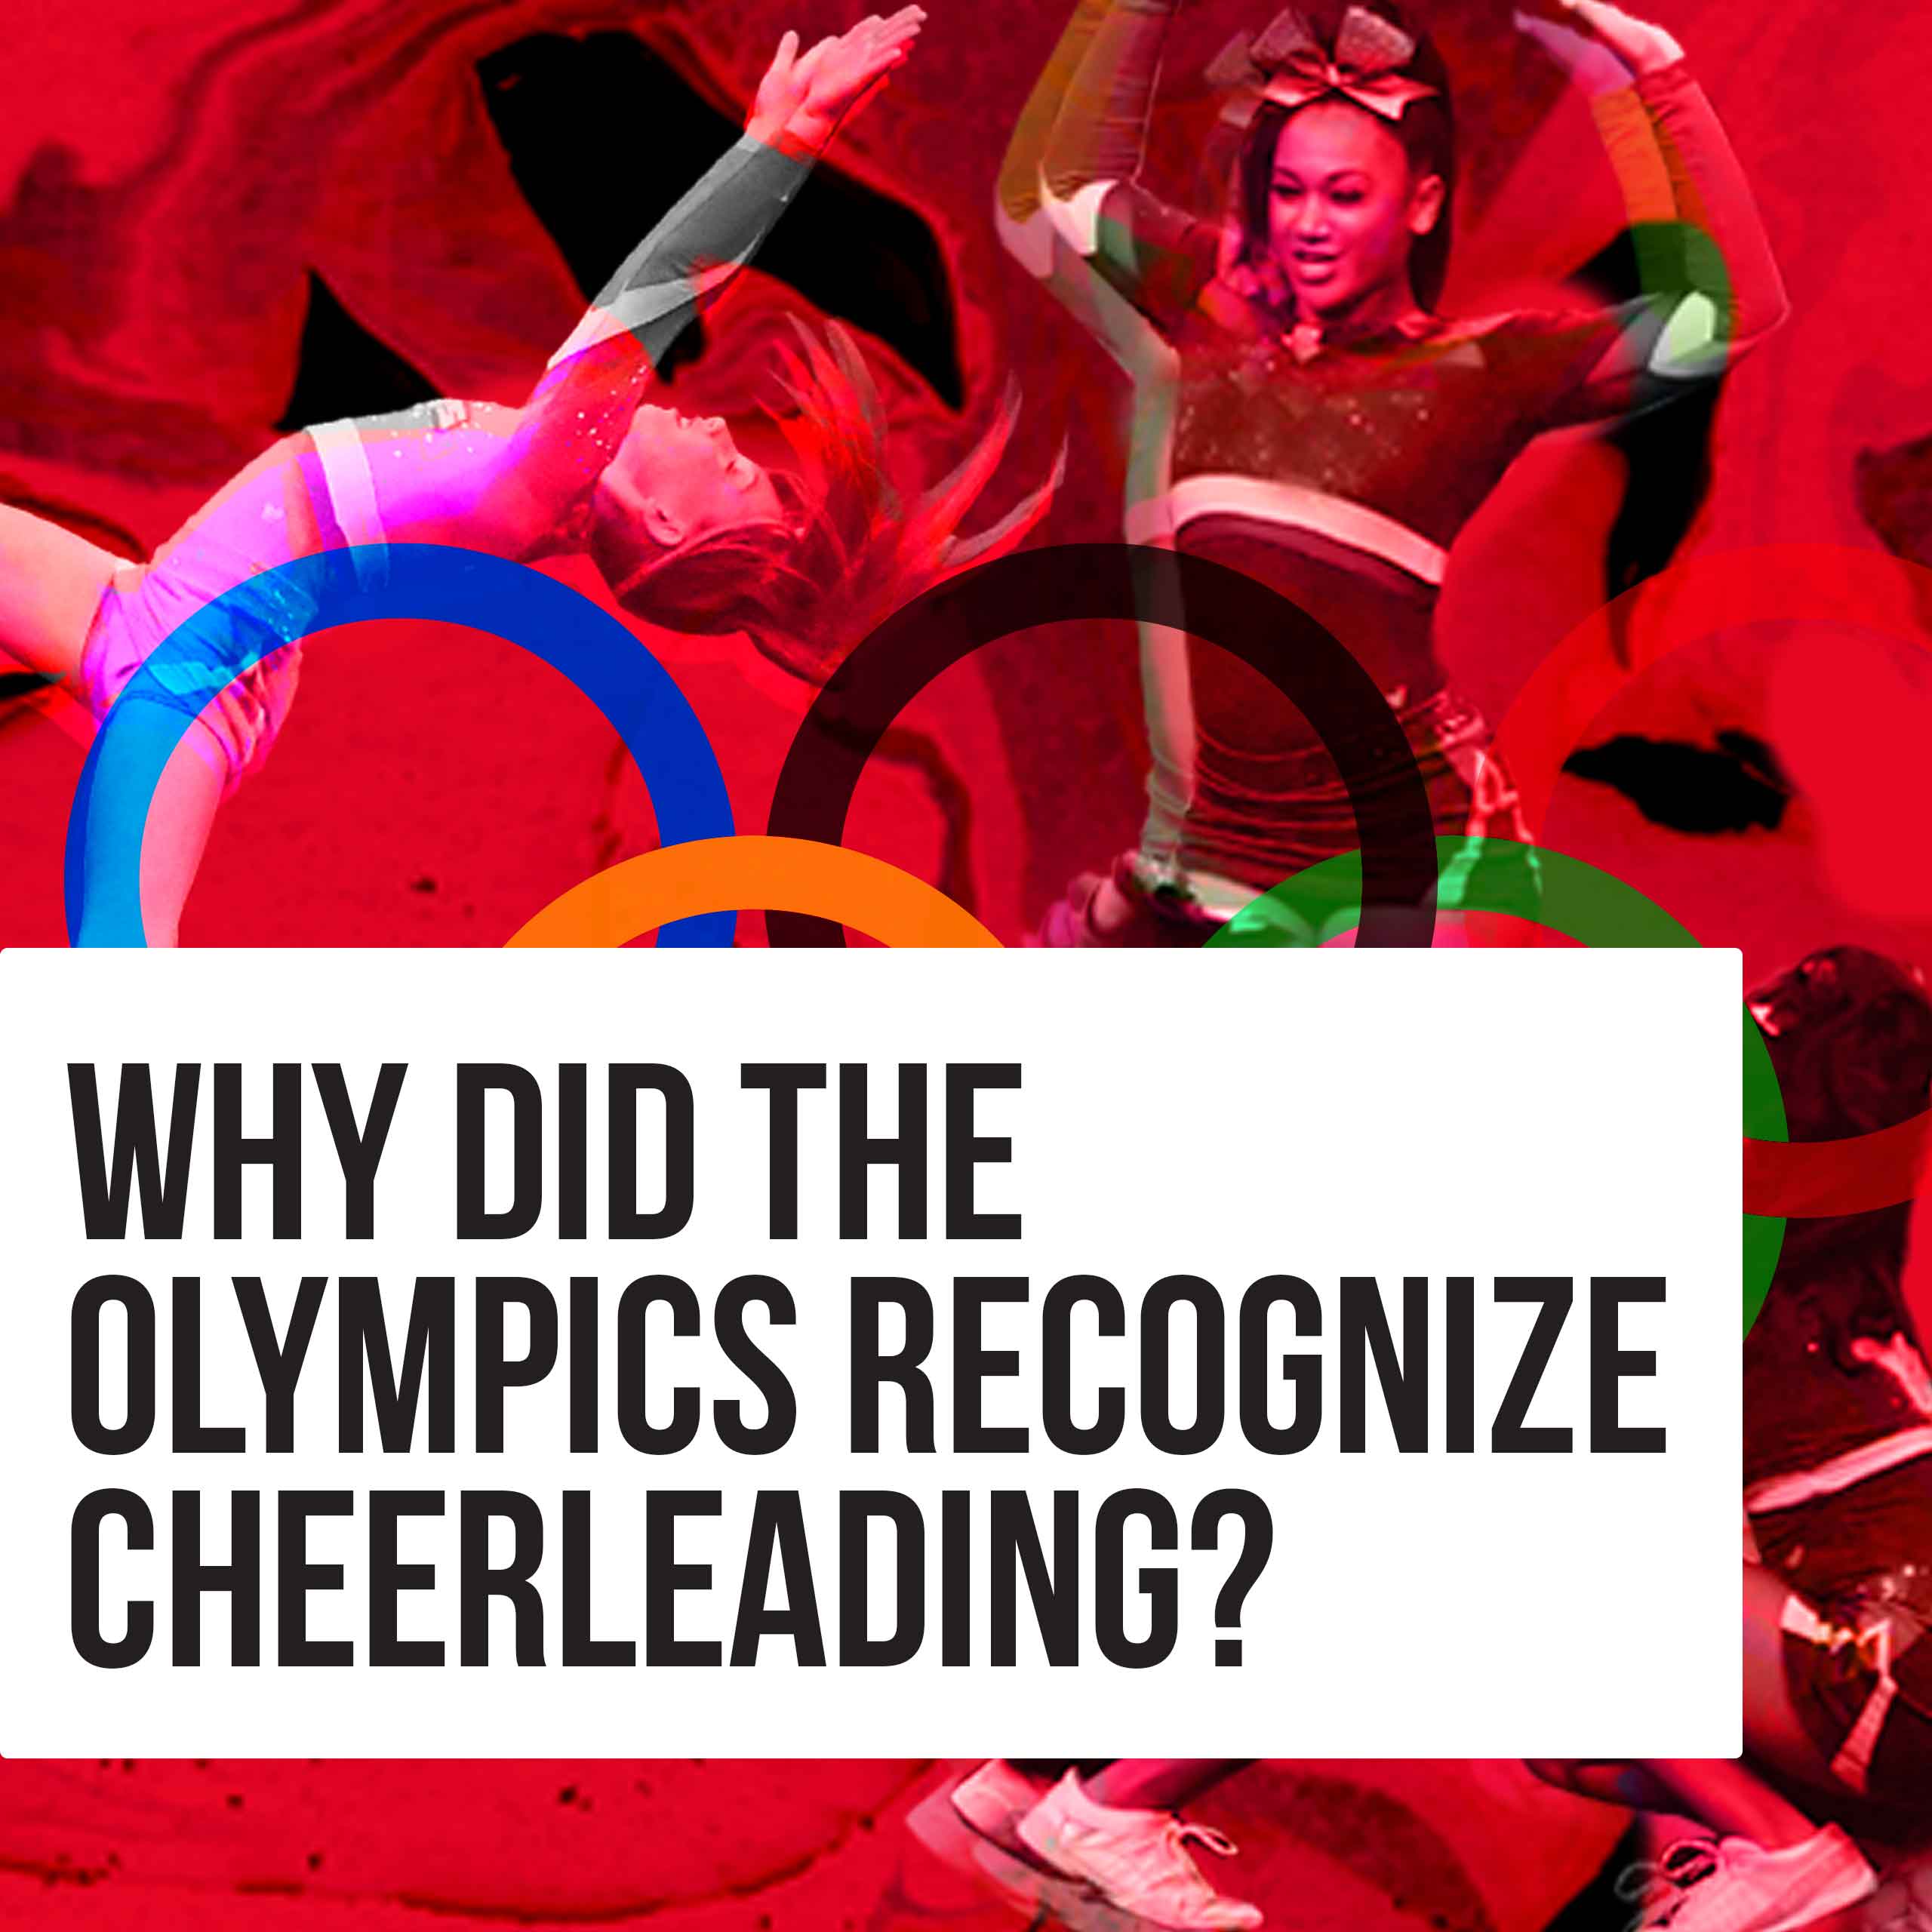 Why did the Olympics recognize cheerleading?